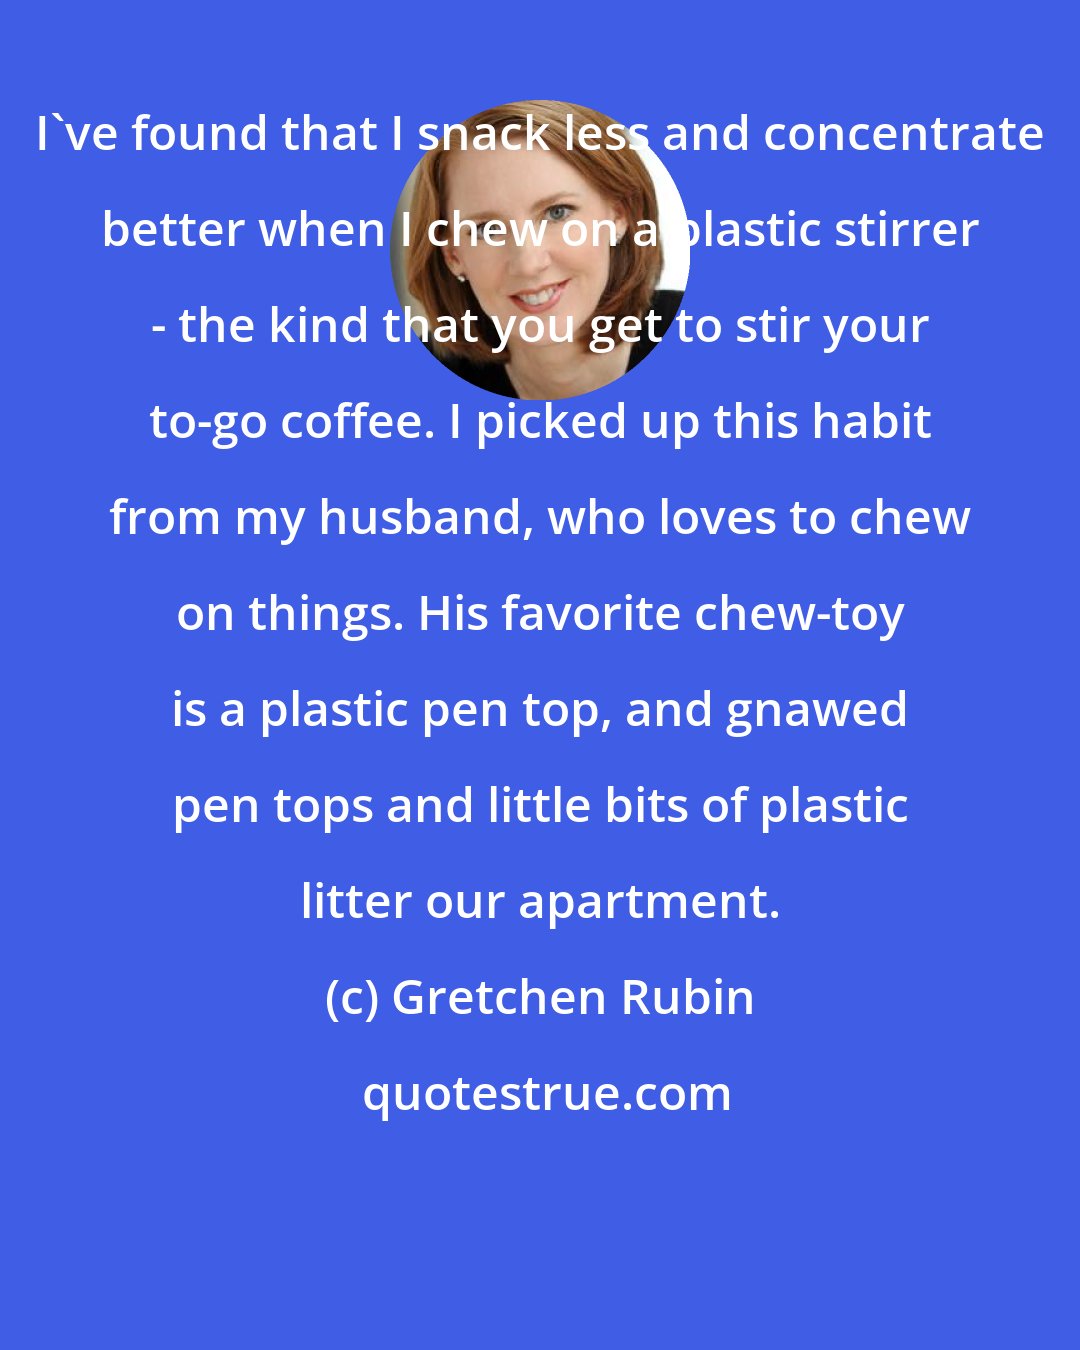 Gretchen Rubin: I've found that I snack less and concentrate better when I chew on a plastic stirrer - the kind that you get to stir your to-go coffee. I picked up this habit from my husband, who loves to chew on things. His favorite chew-toy is a plastic pen top, and gnawed pen tops and little bits of plastic litter our apartment.